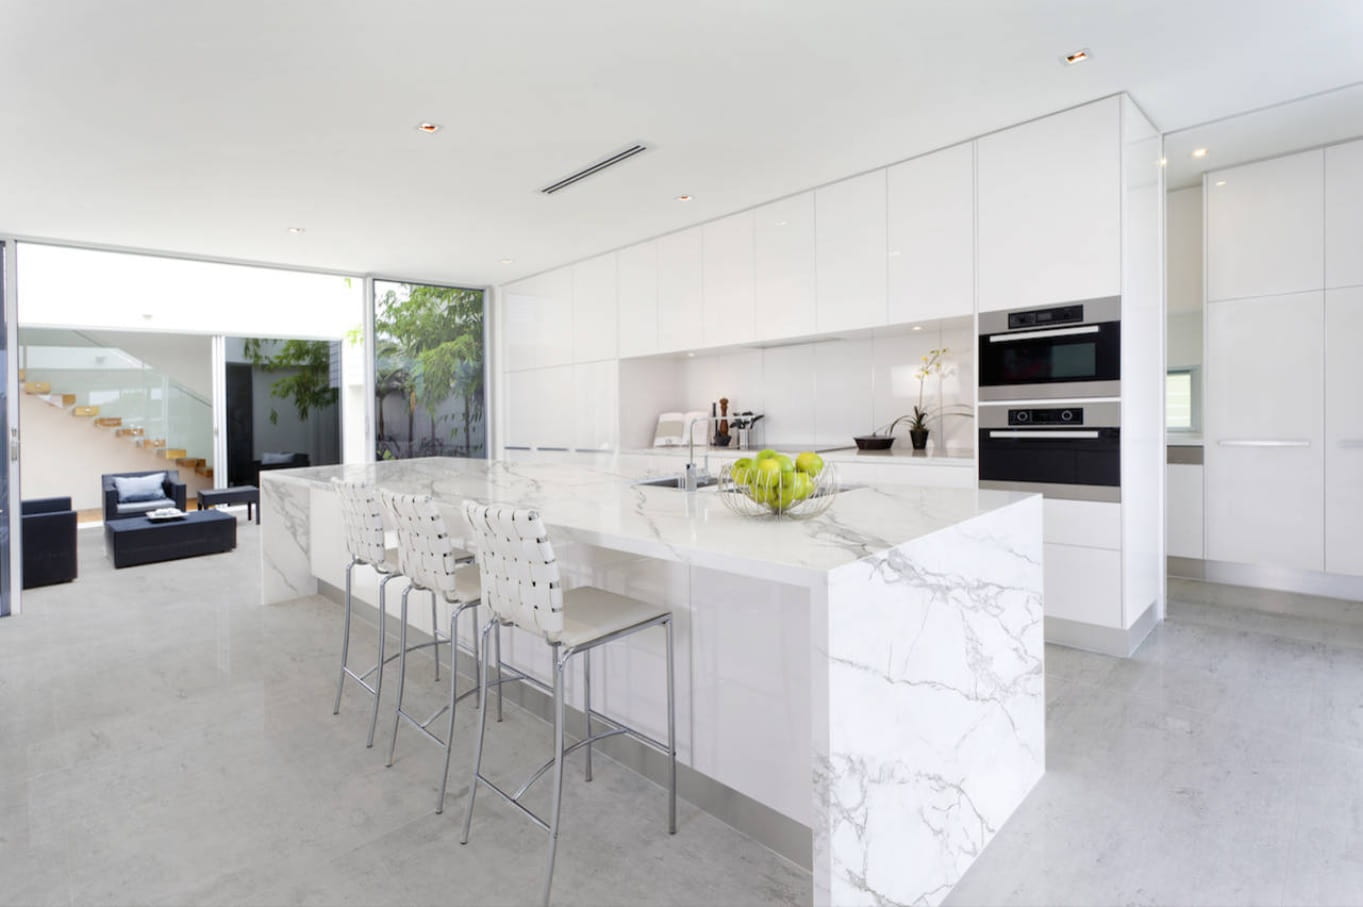 Reasons Why Concrete is the Best Flooring Alternative to Your Homes. Spacious modern kitchen interior design with white cabinets and marble streaks at the central island